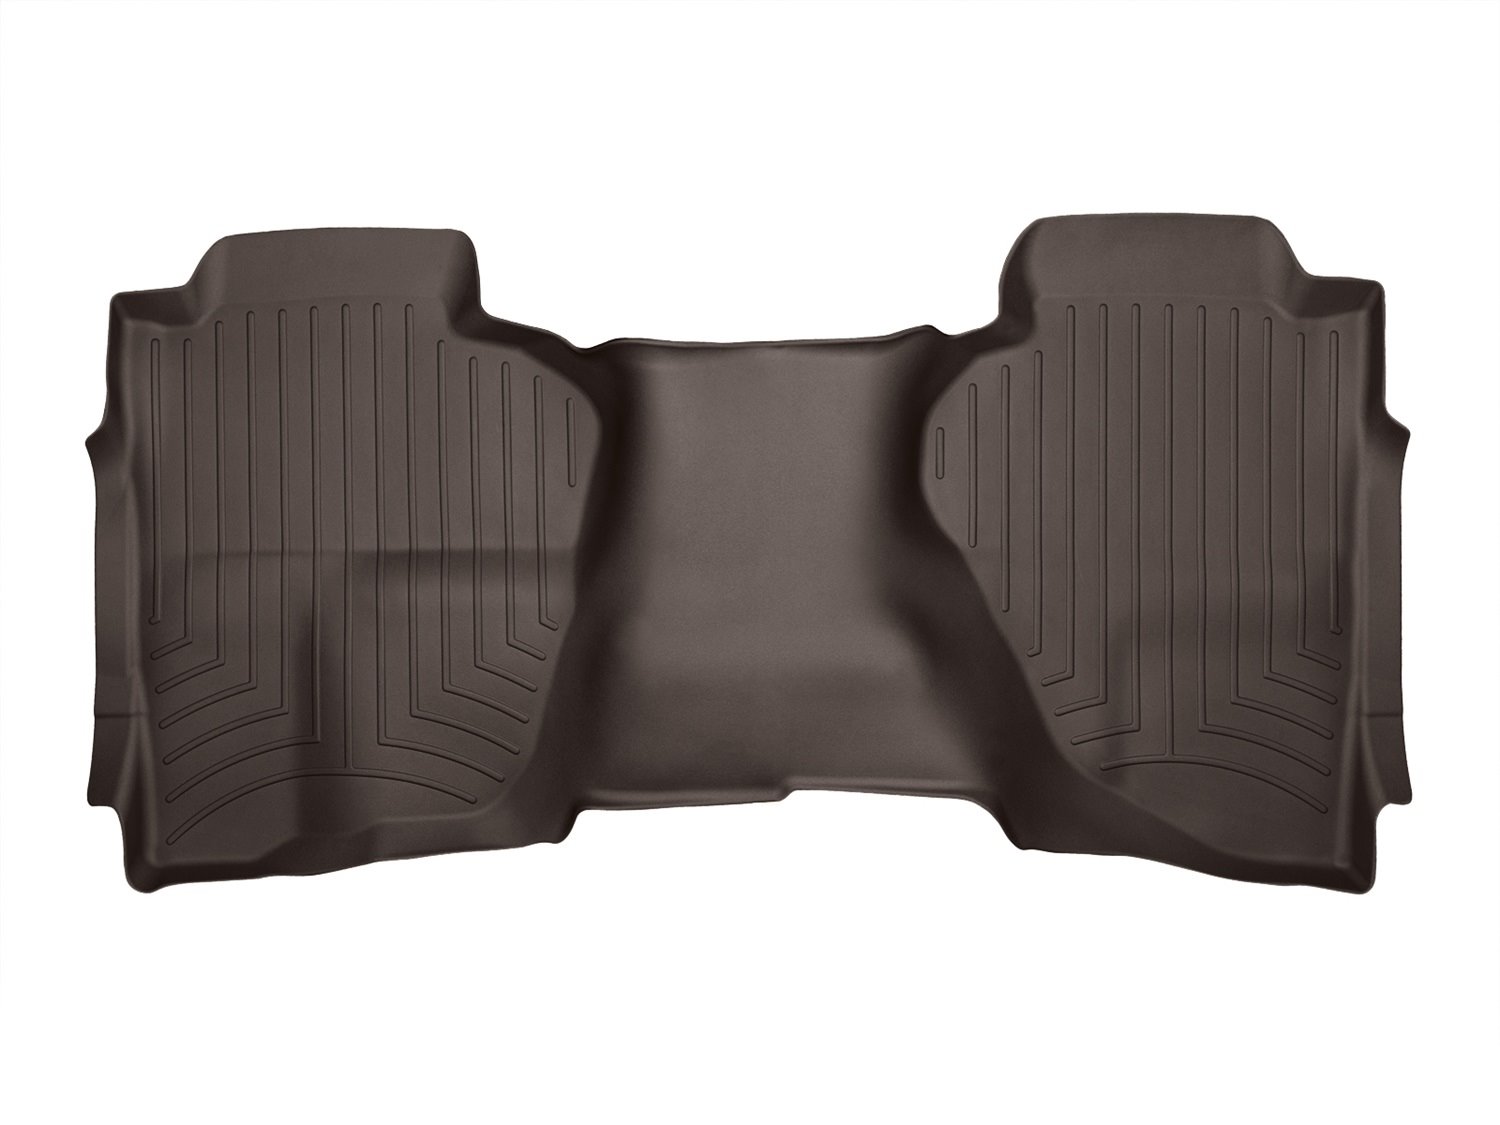 REAR FLOORLINER COCOA CHEVROLET SILVERADO 2014-2017 FITS DOUBLE CAB ONLY; FITS 1500 MODELS ONLY